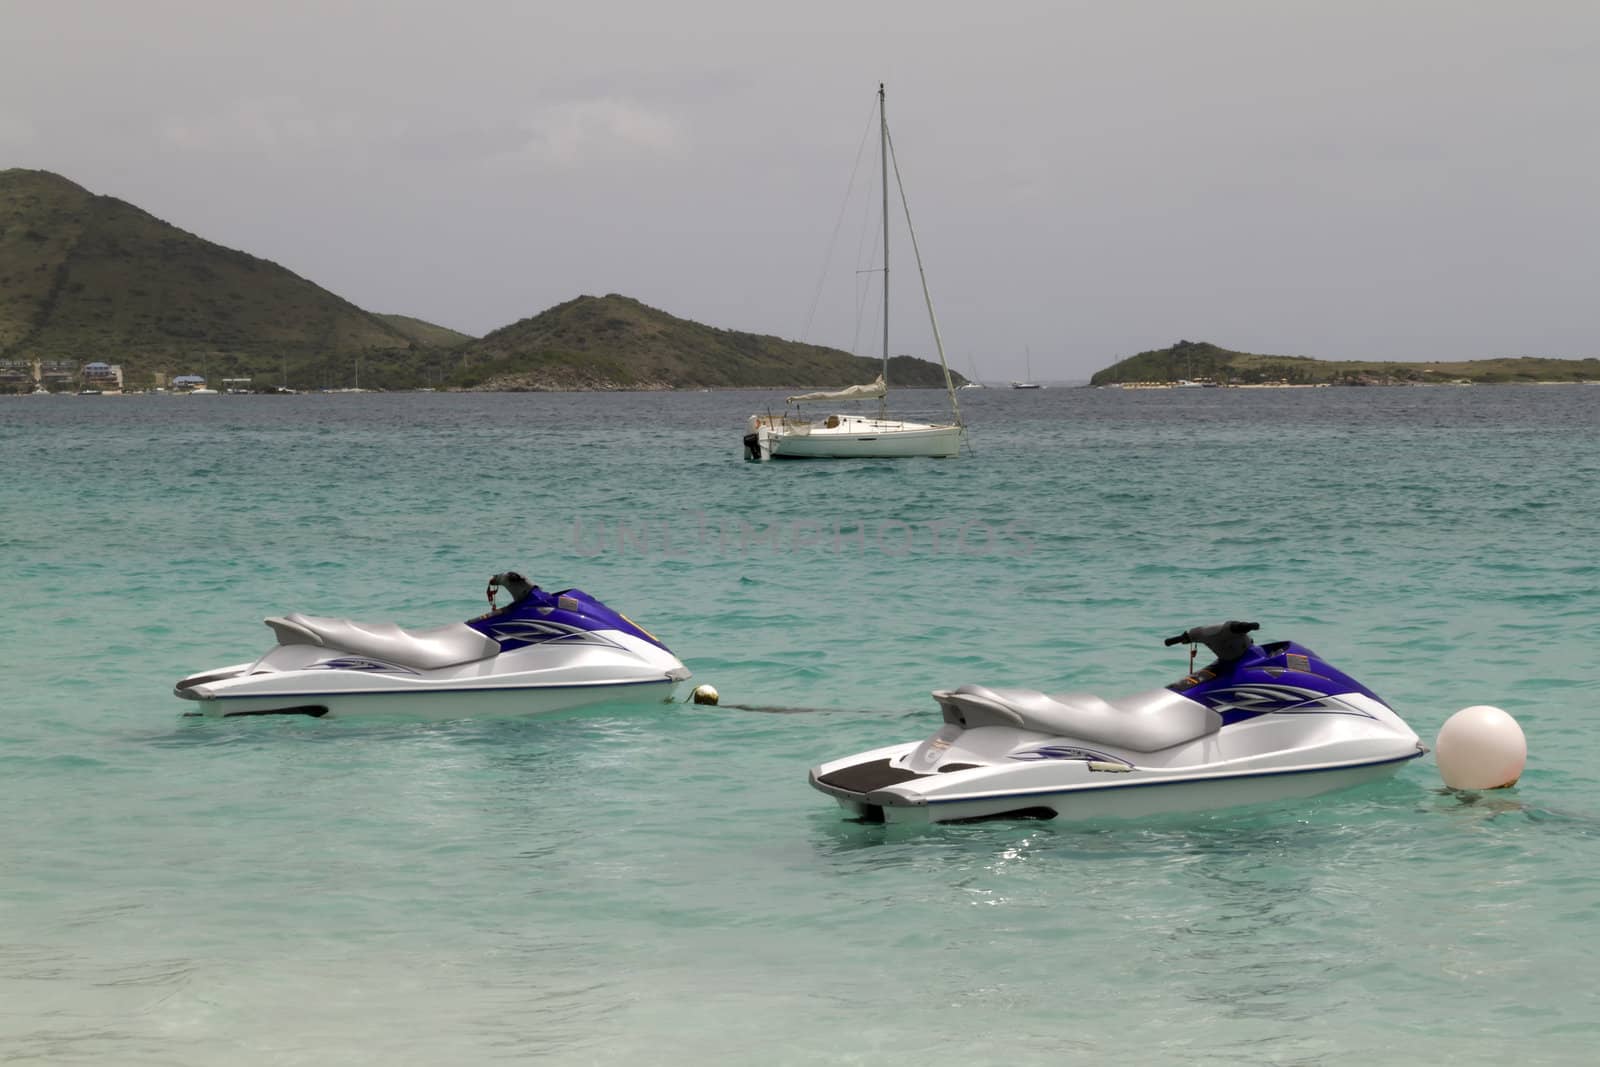 Two jet skies tied up in the Caribbean Sea